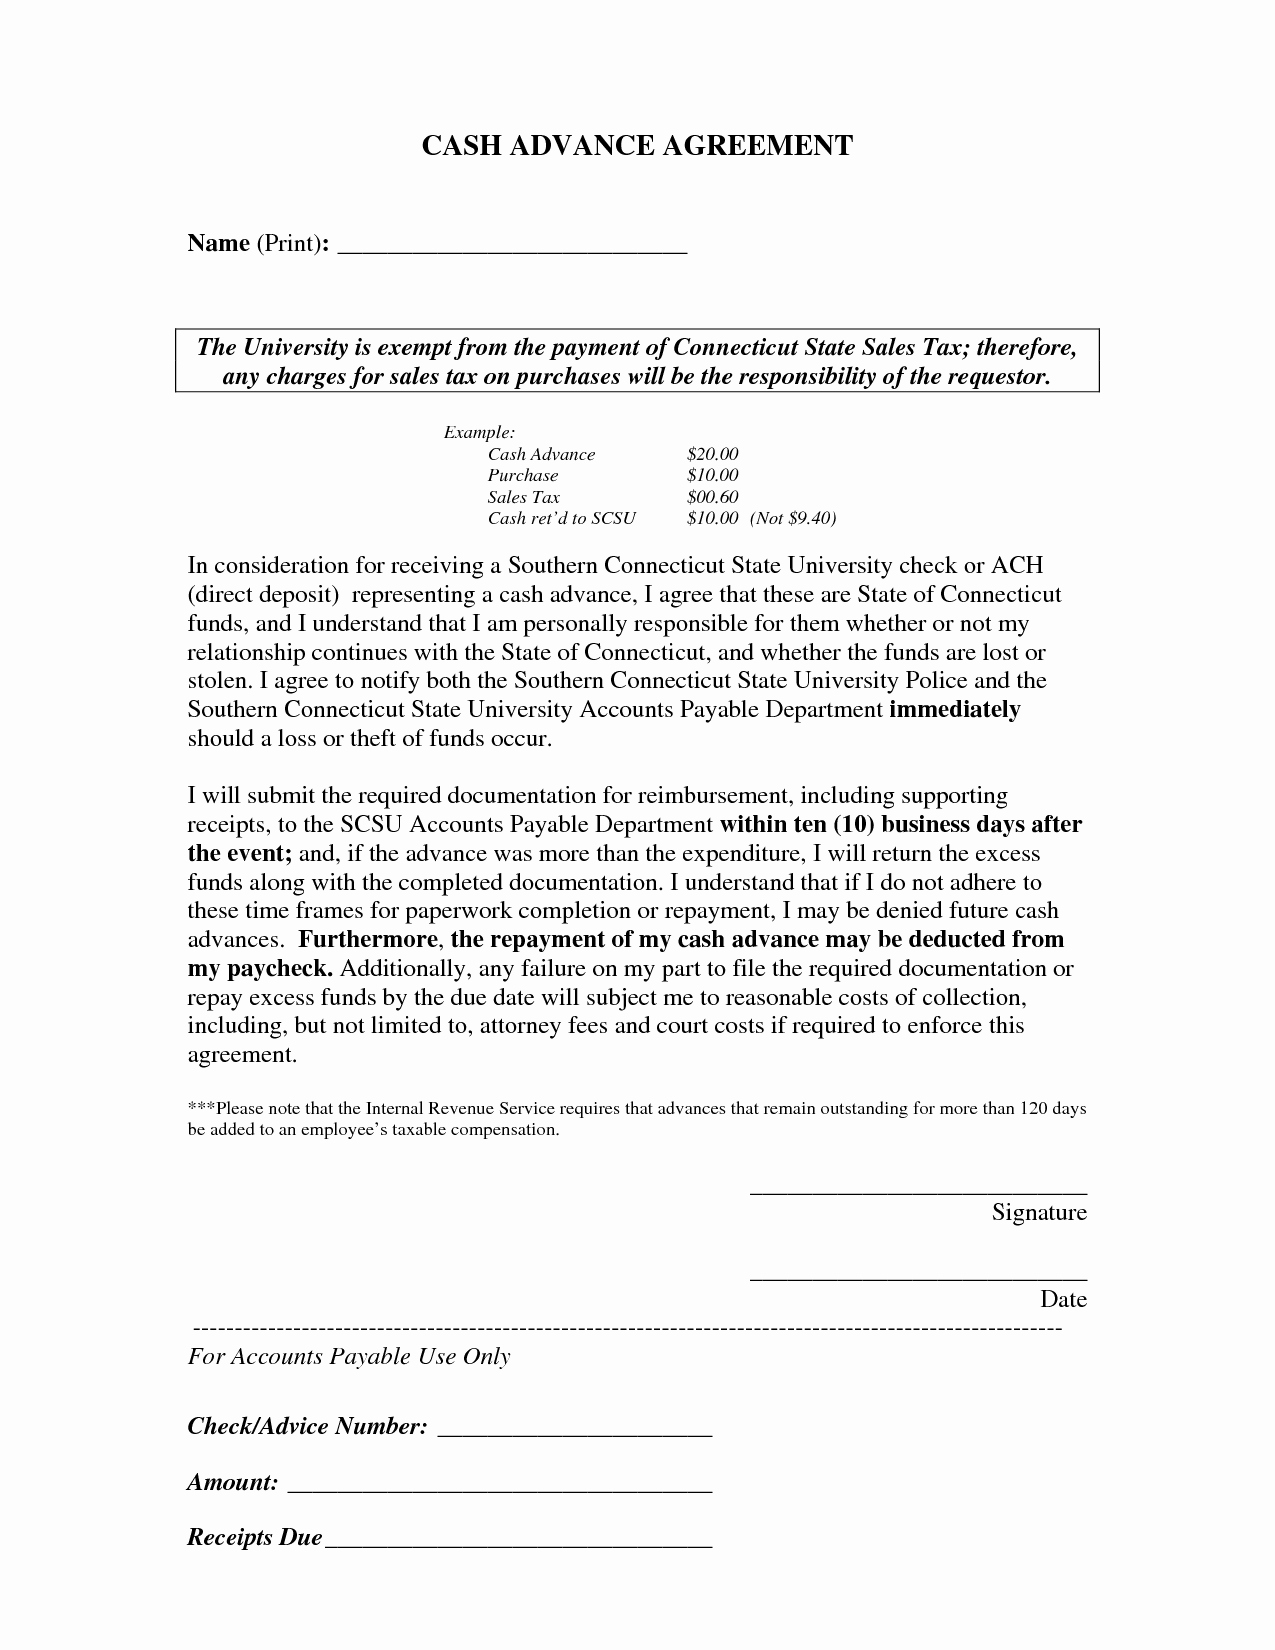 Money Loan Contract Template Awesome 10 Best Of Cash Loan Agreement Cash Loan